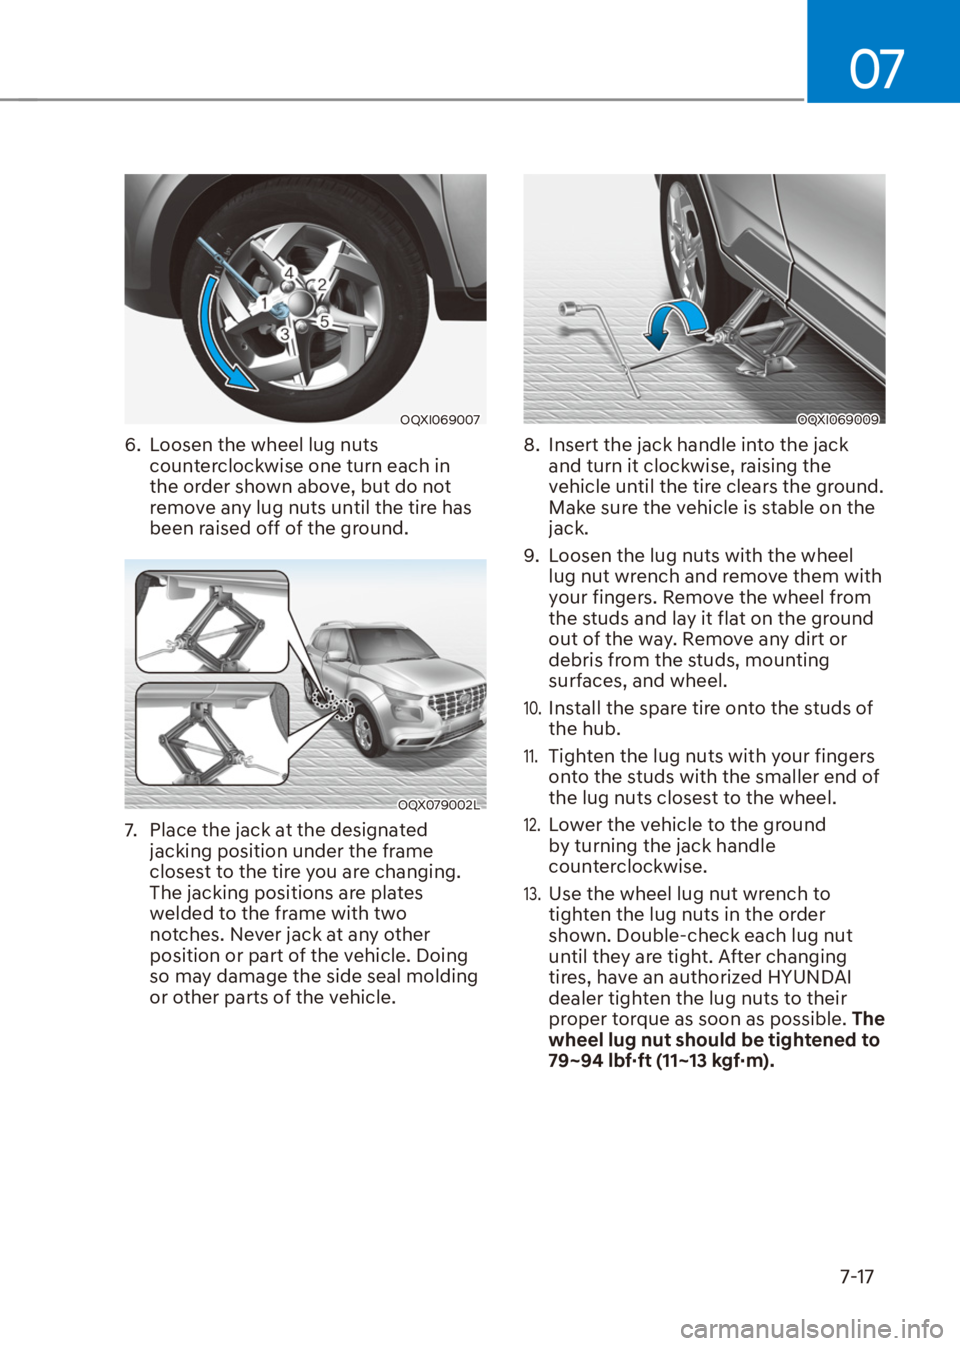 HYUNDAI VENUE 2022  Owners Manual 07
7-17
OQXI069007
6.  Loosen the wheel lug nuts 
counterclockwise one turn each in 
the order shown above, but do not 
remove any lug nuts until the tire has 
been raised off of the ground.
OQX079002